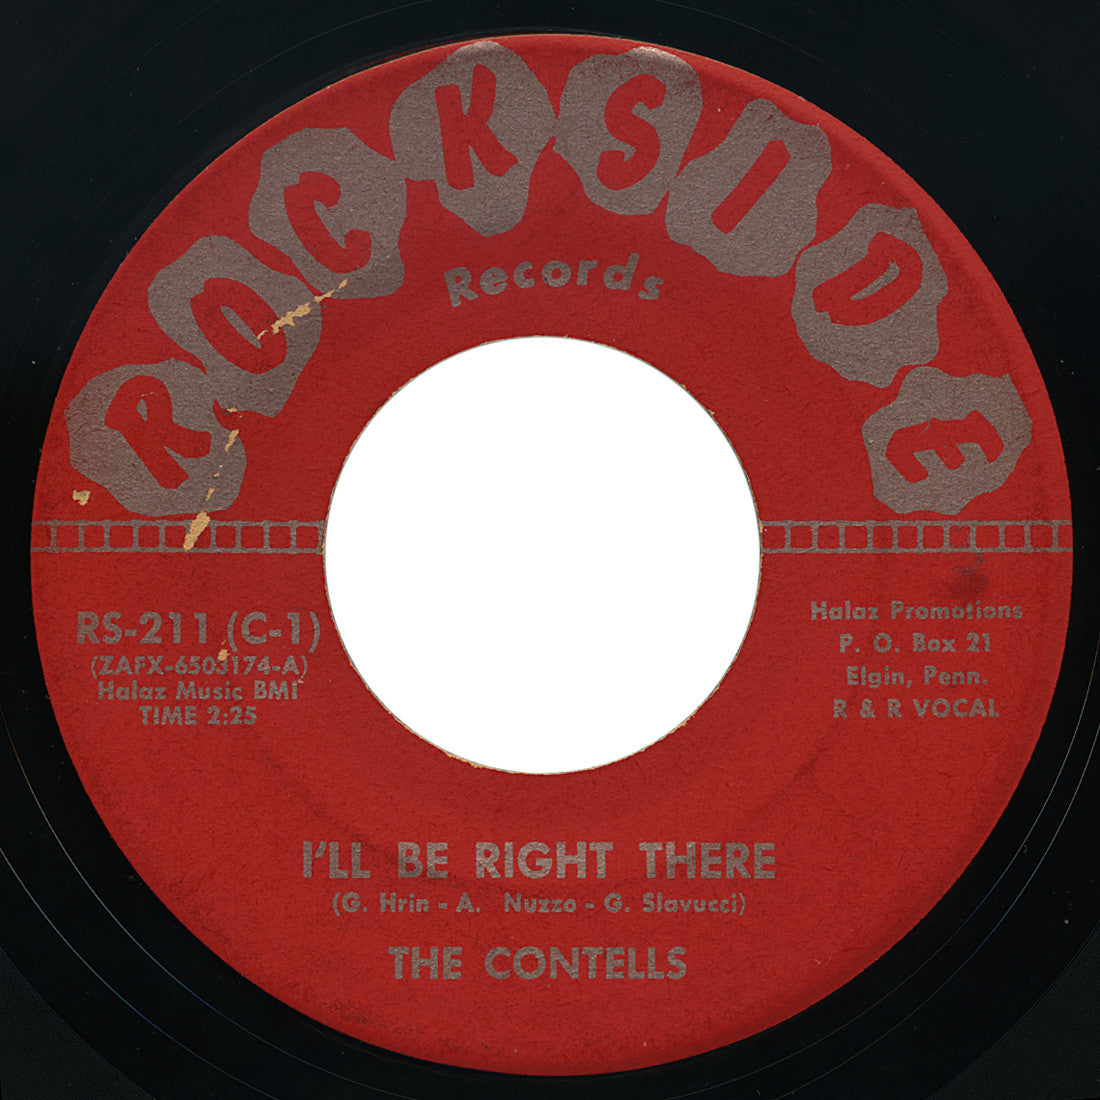 Contells – I’ll Be Right There – Rockside